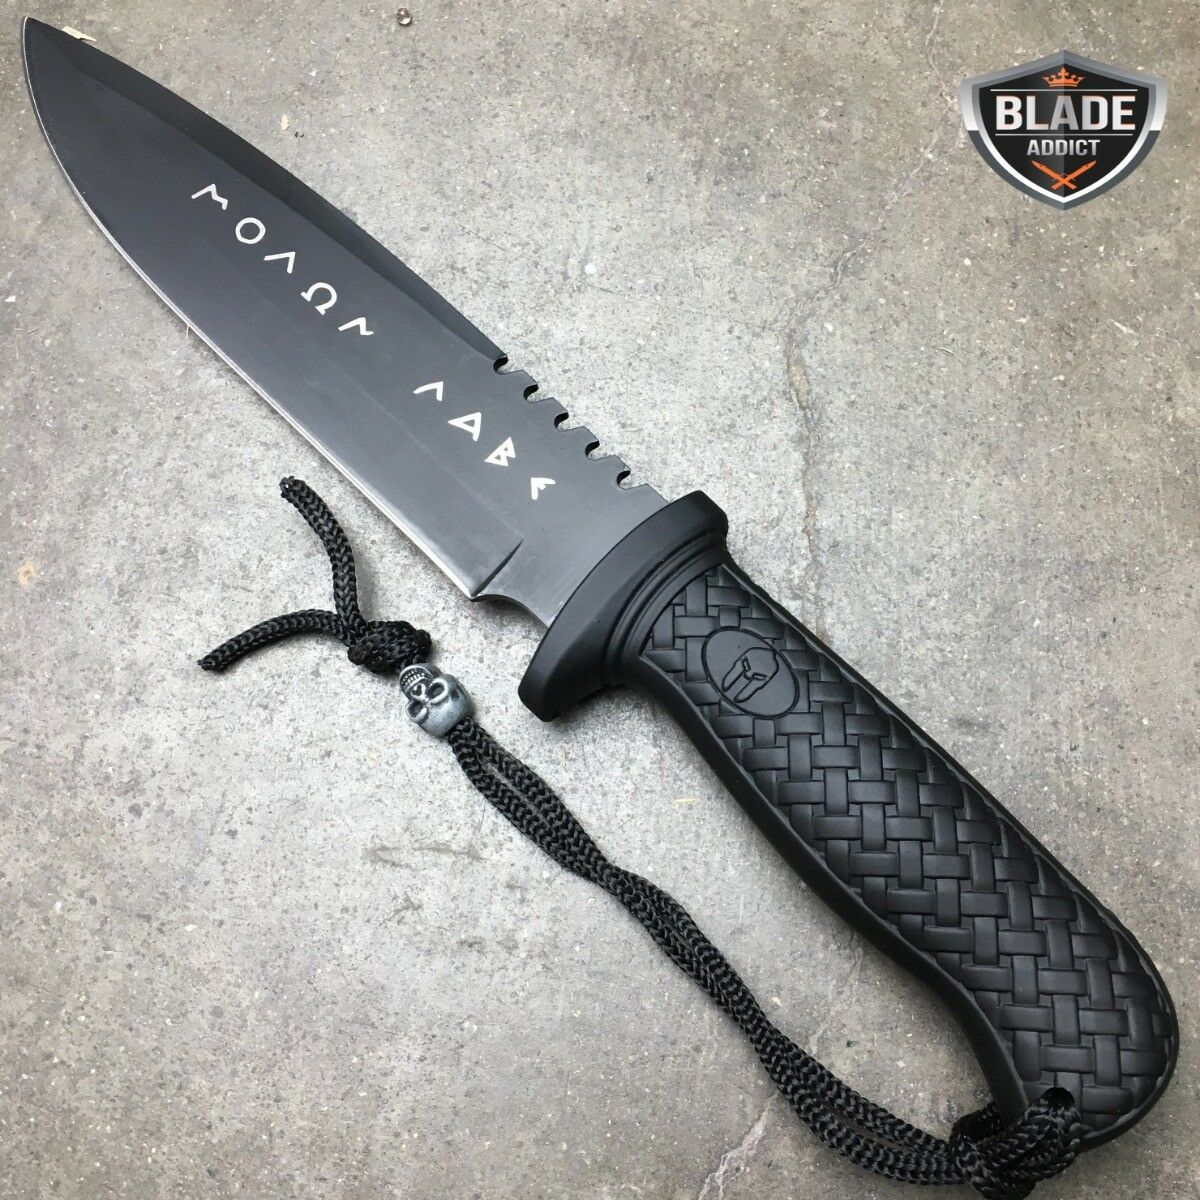 12" TACTICAL SURVIVAL Rambo Hunting FIXED BLADE SPARTAN KNIFE Army Bowie BLACK